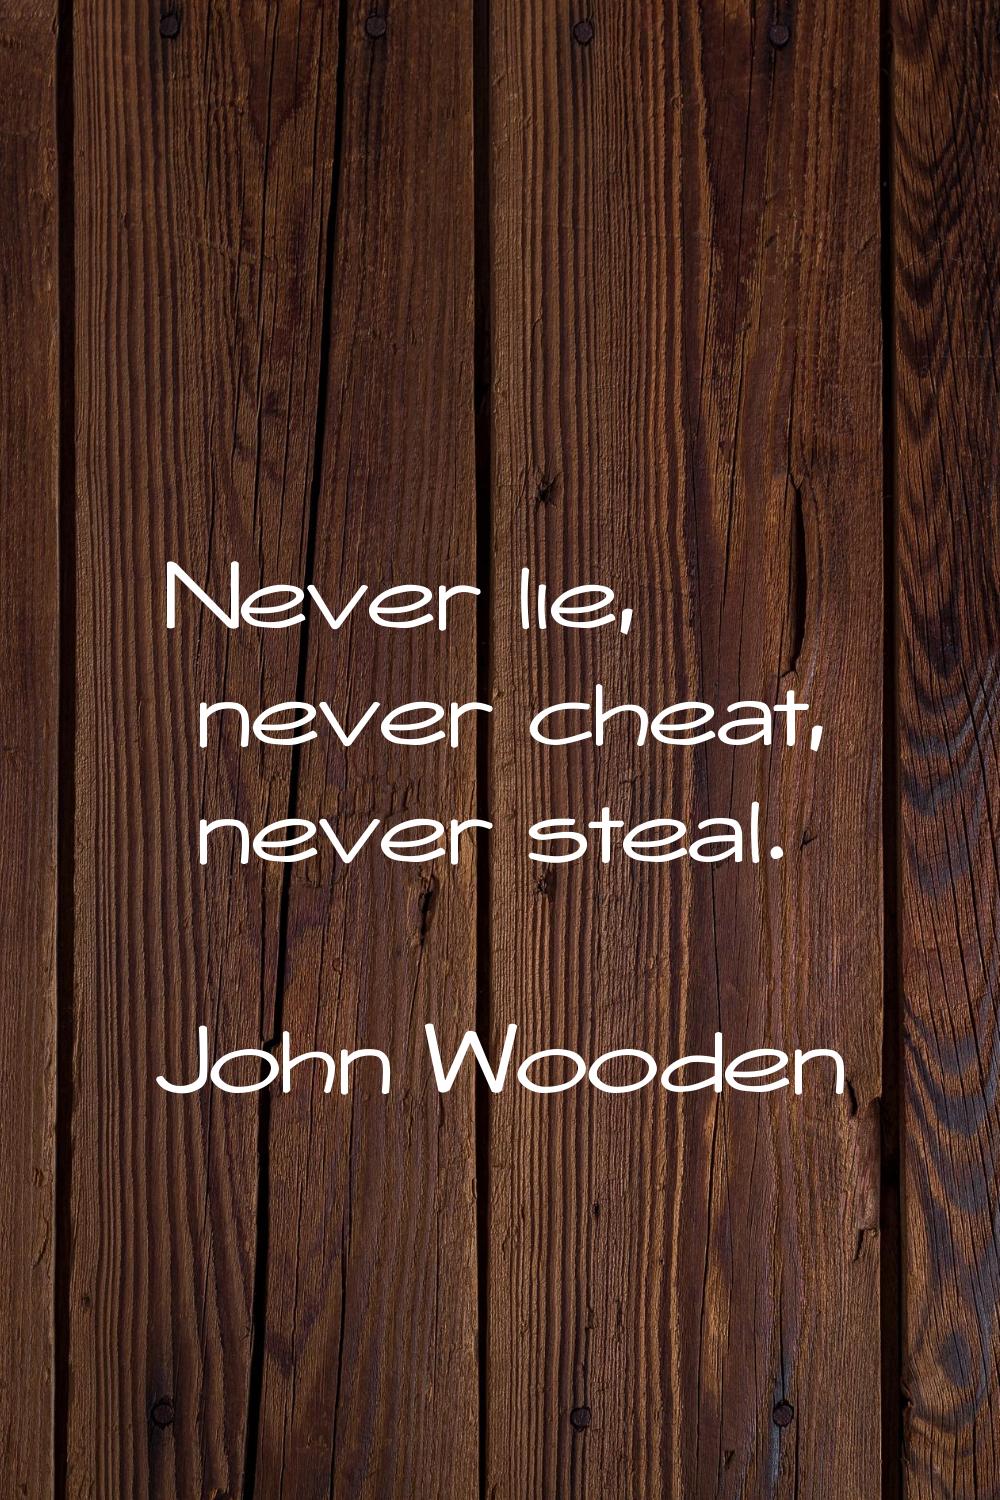 Never lie, never cheat, never steal.